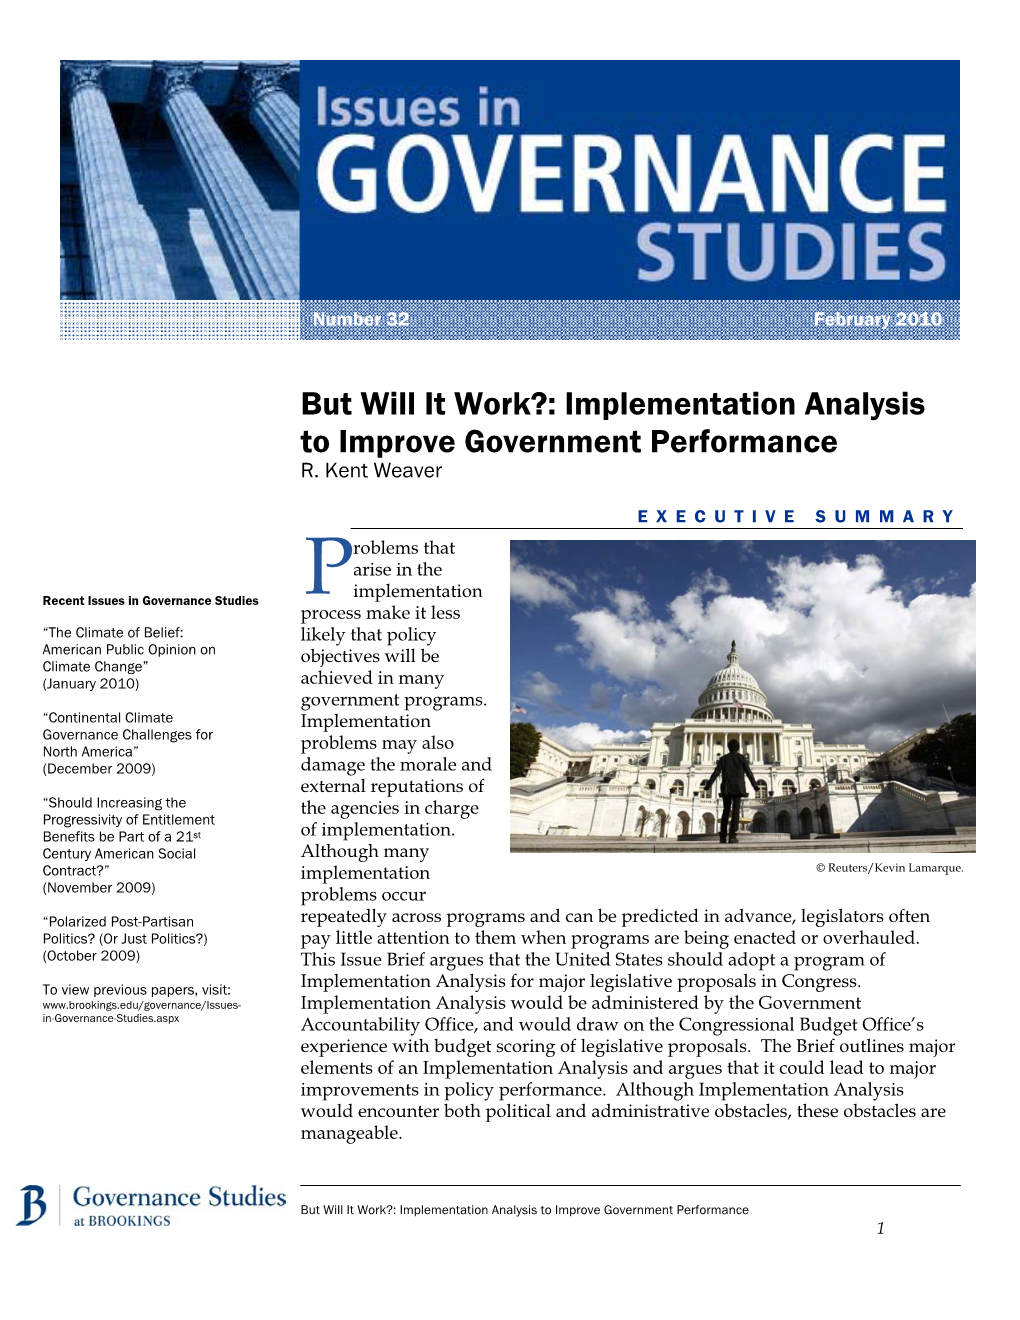 Implementation Analysis to Improve Government Performance R